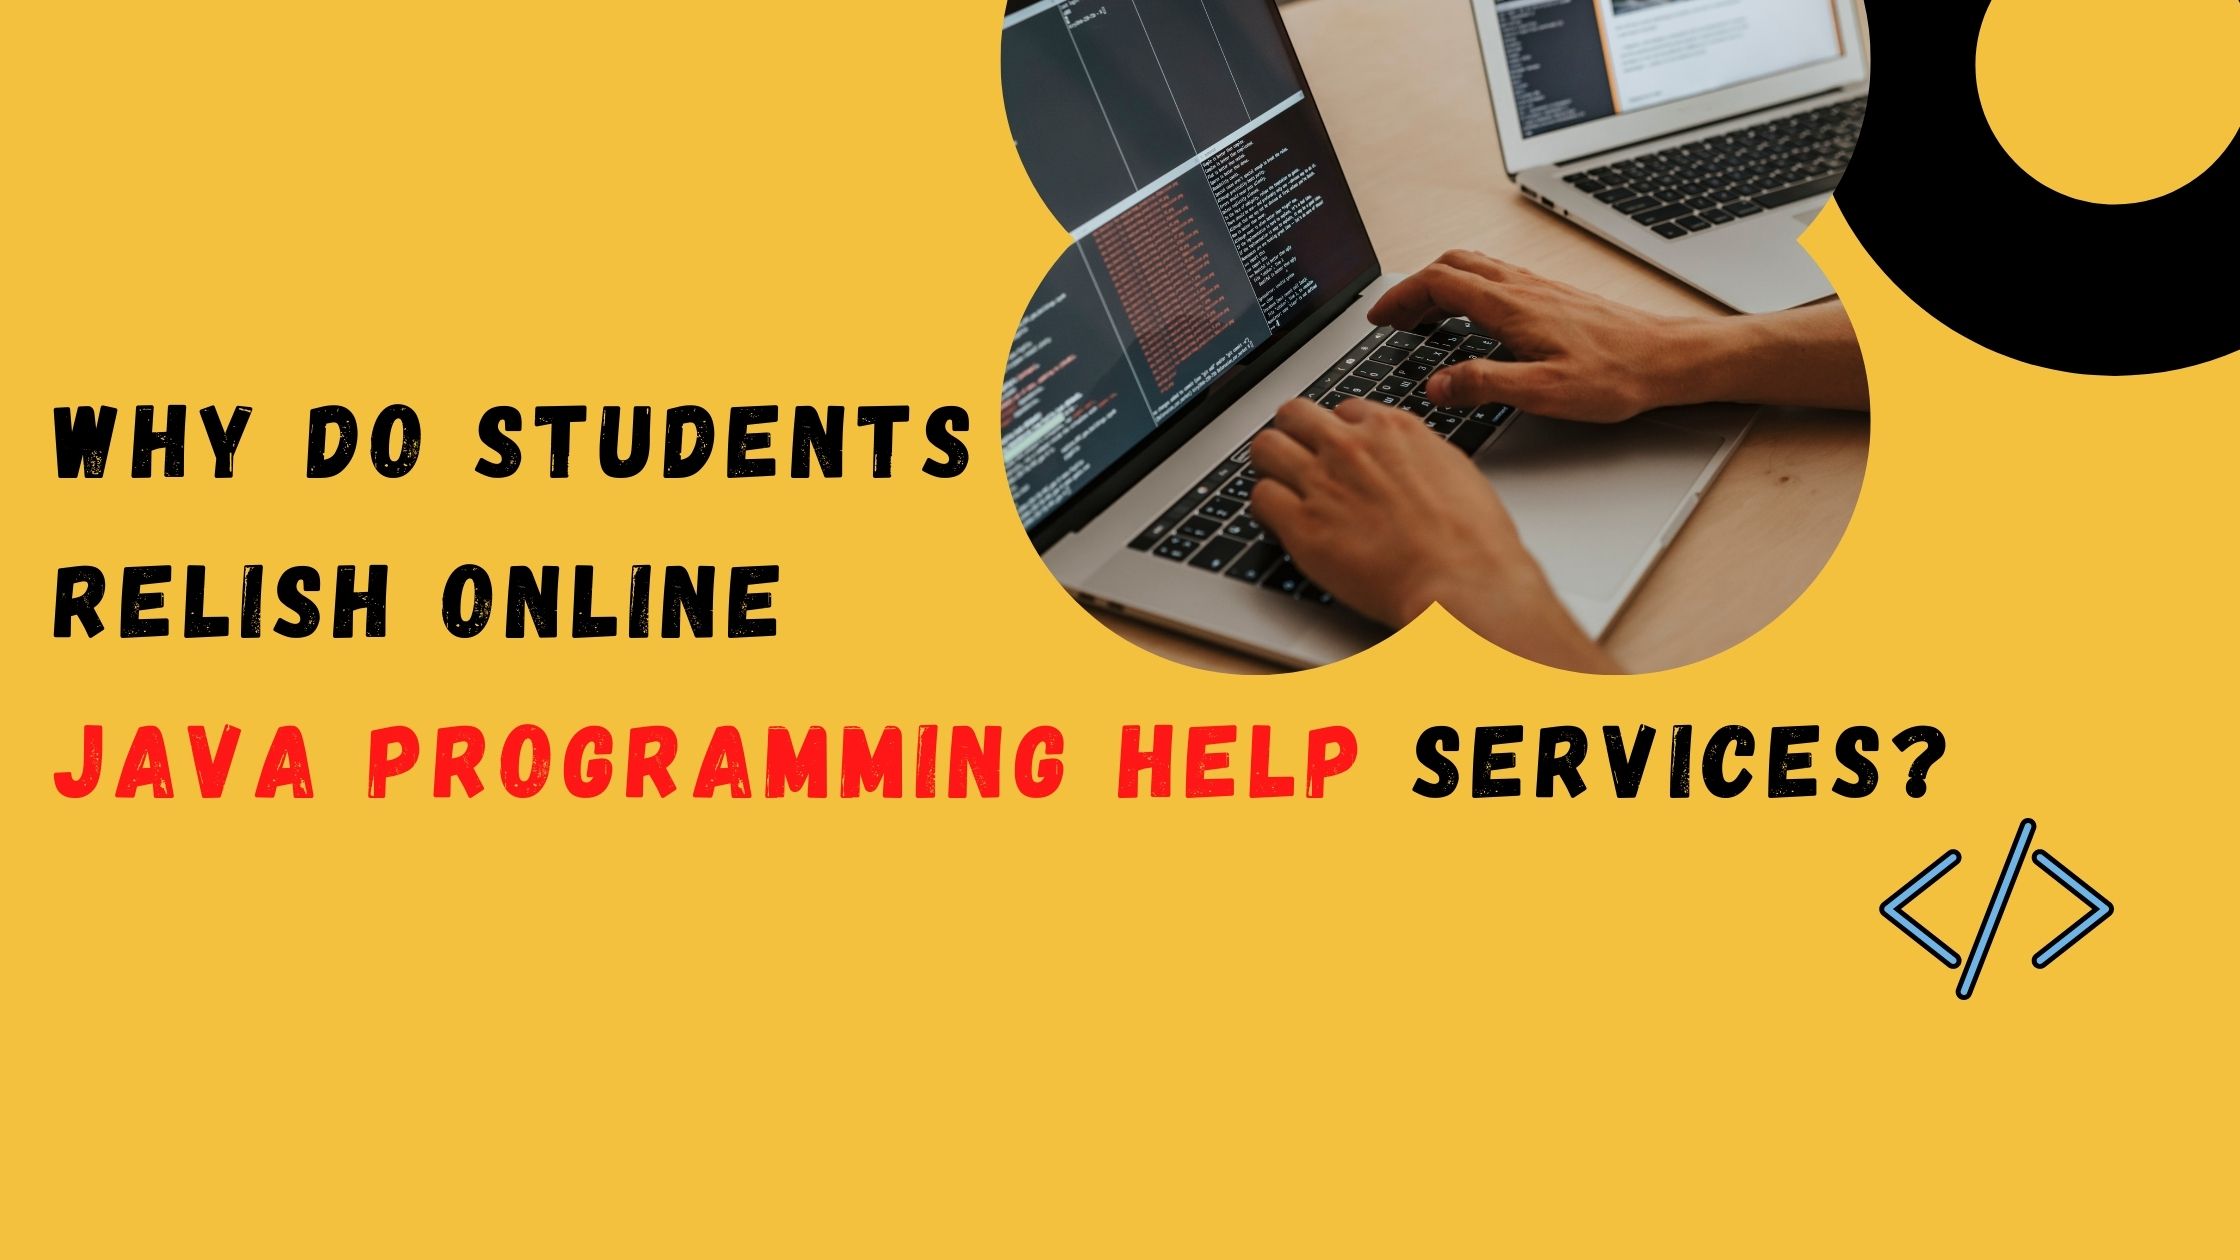 Why do students relish online Java programming help services?